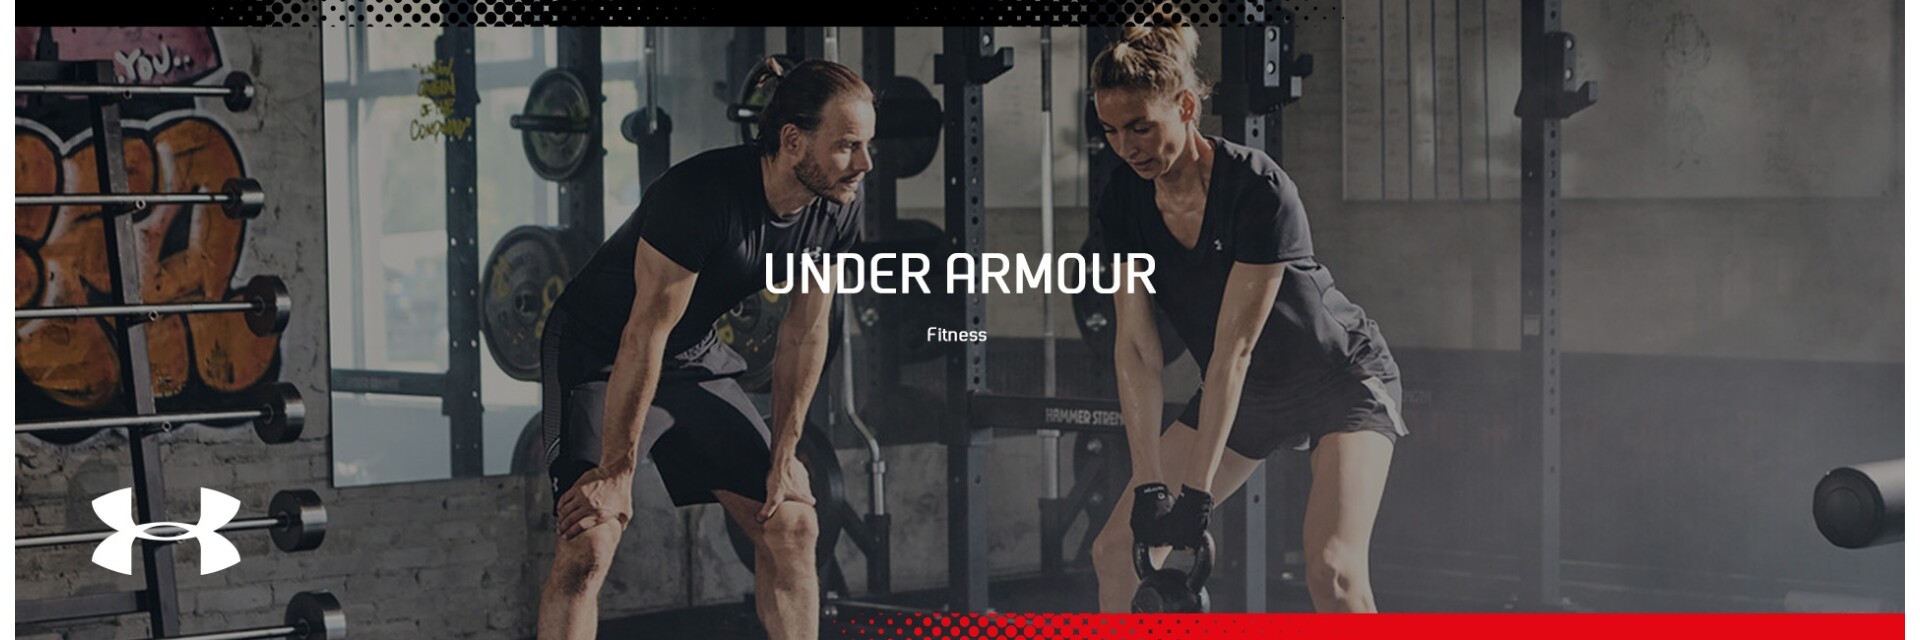 Under Armour Fitness HW 22 Banner